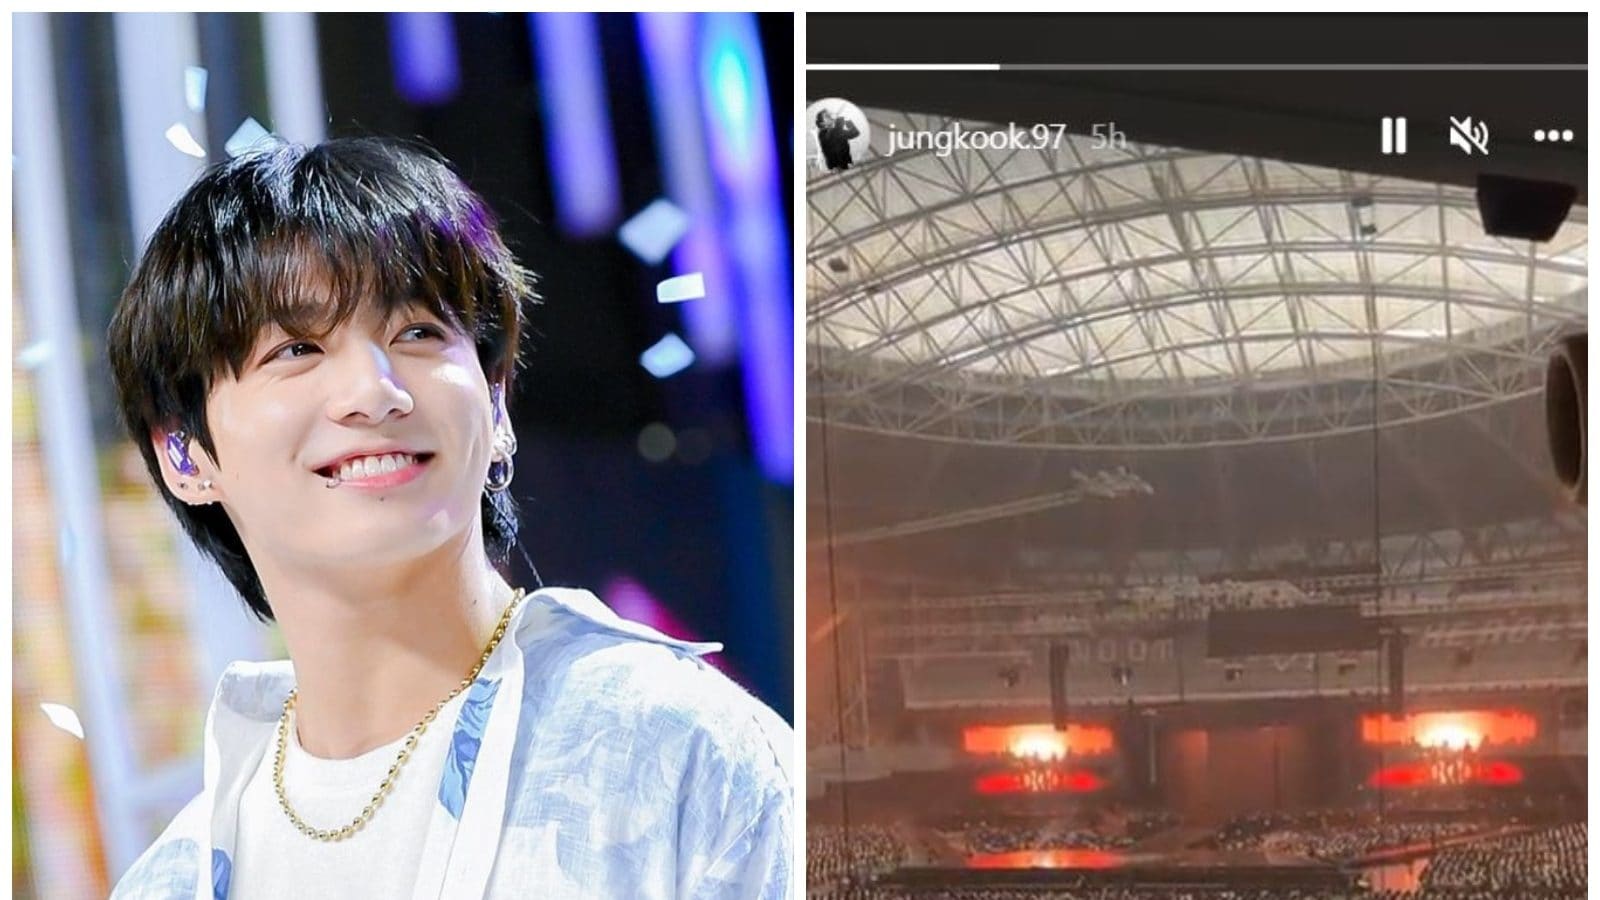 Jungkook Attends Seventeen's Concert in Seoul to Support Friend Mingyu